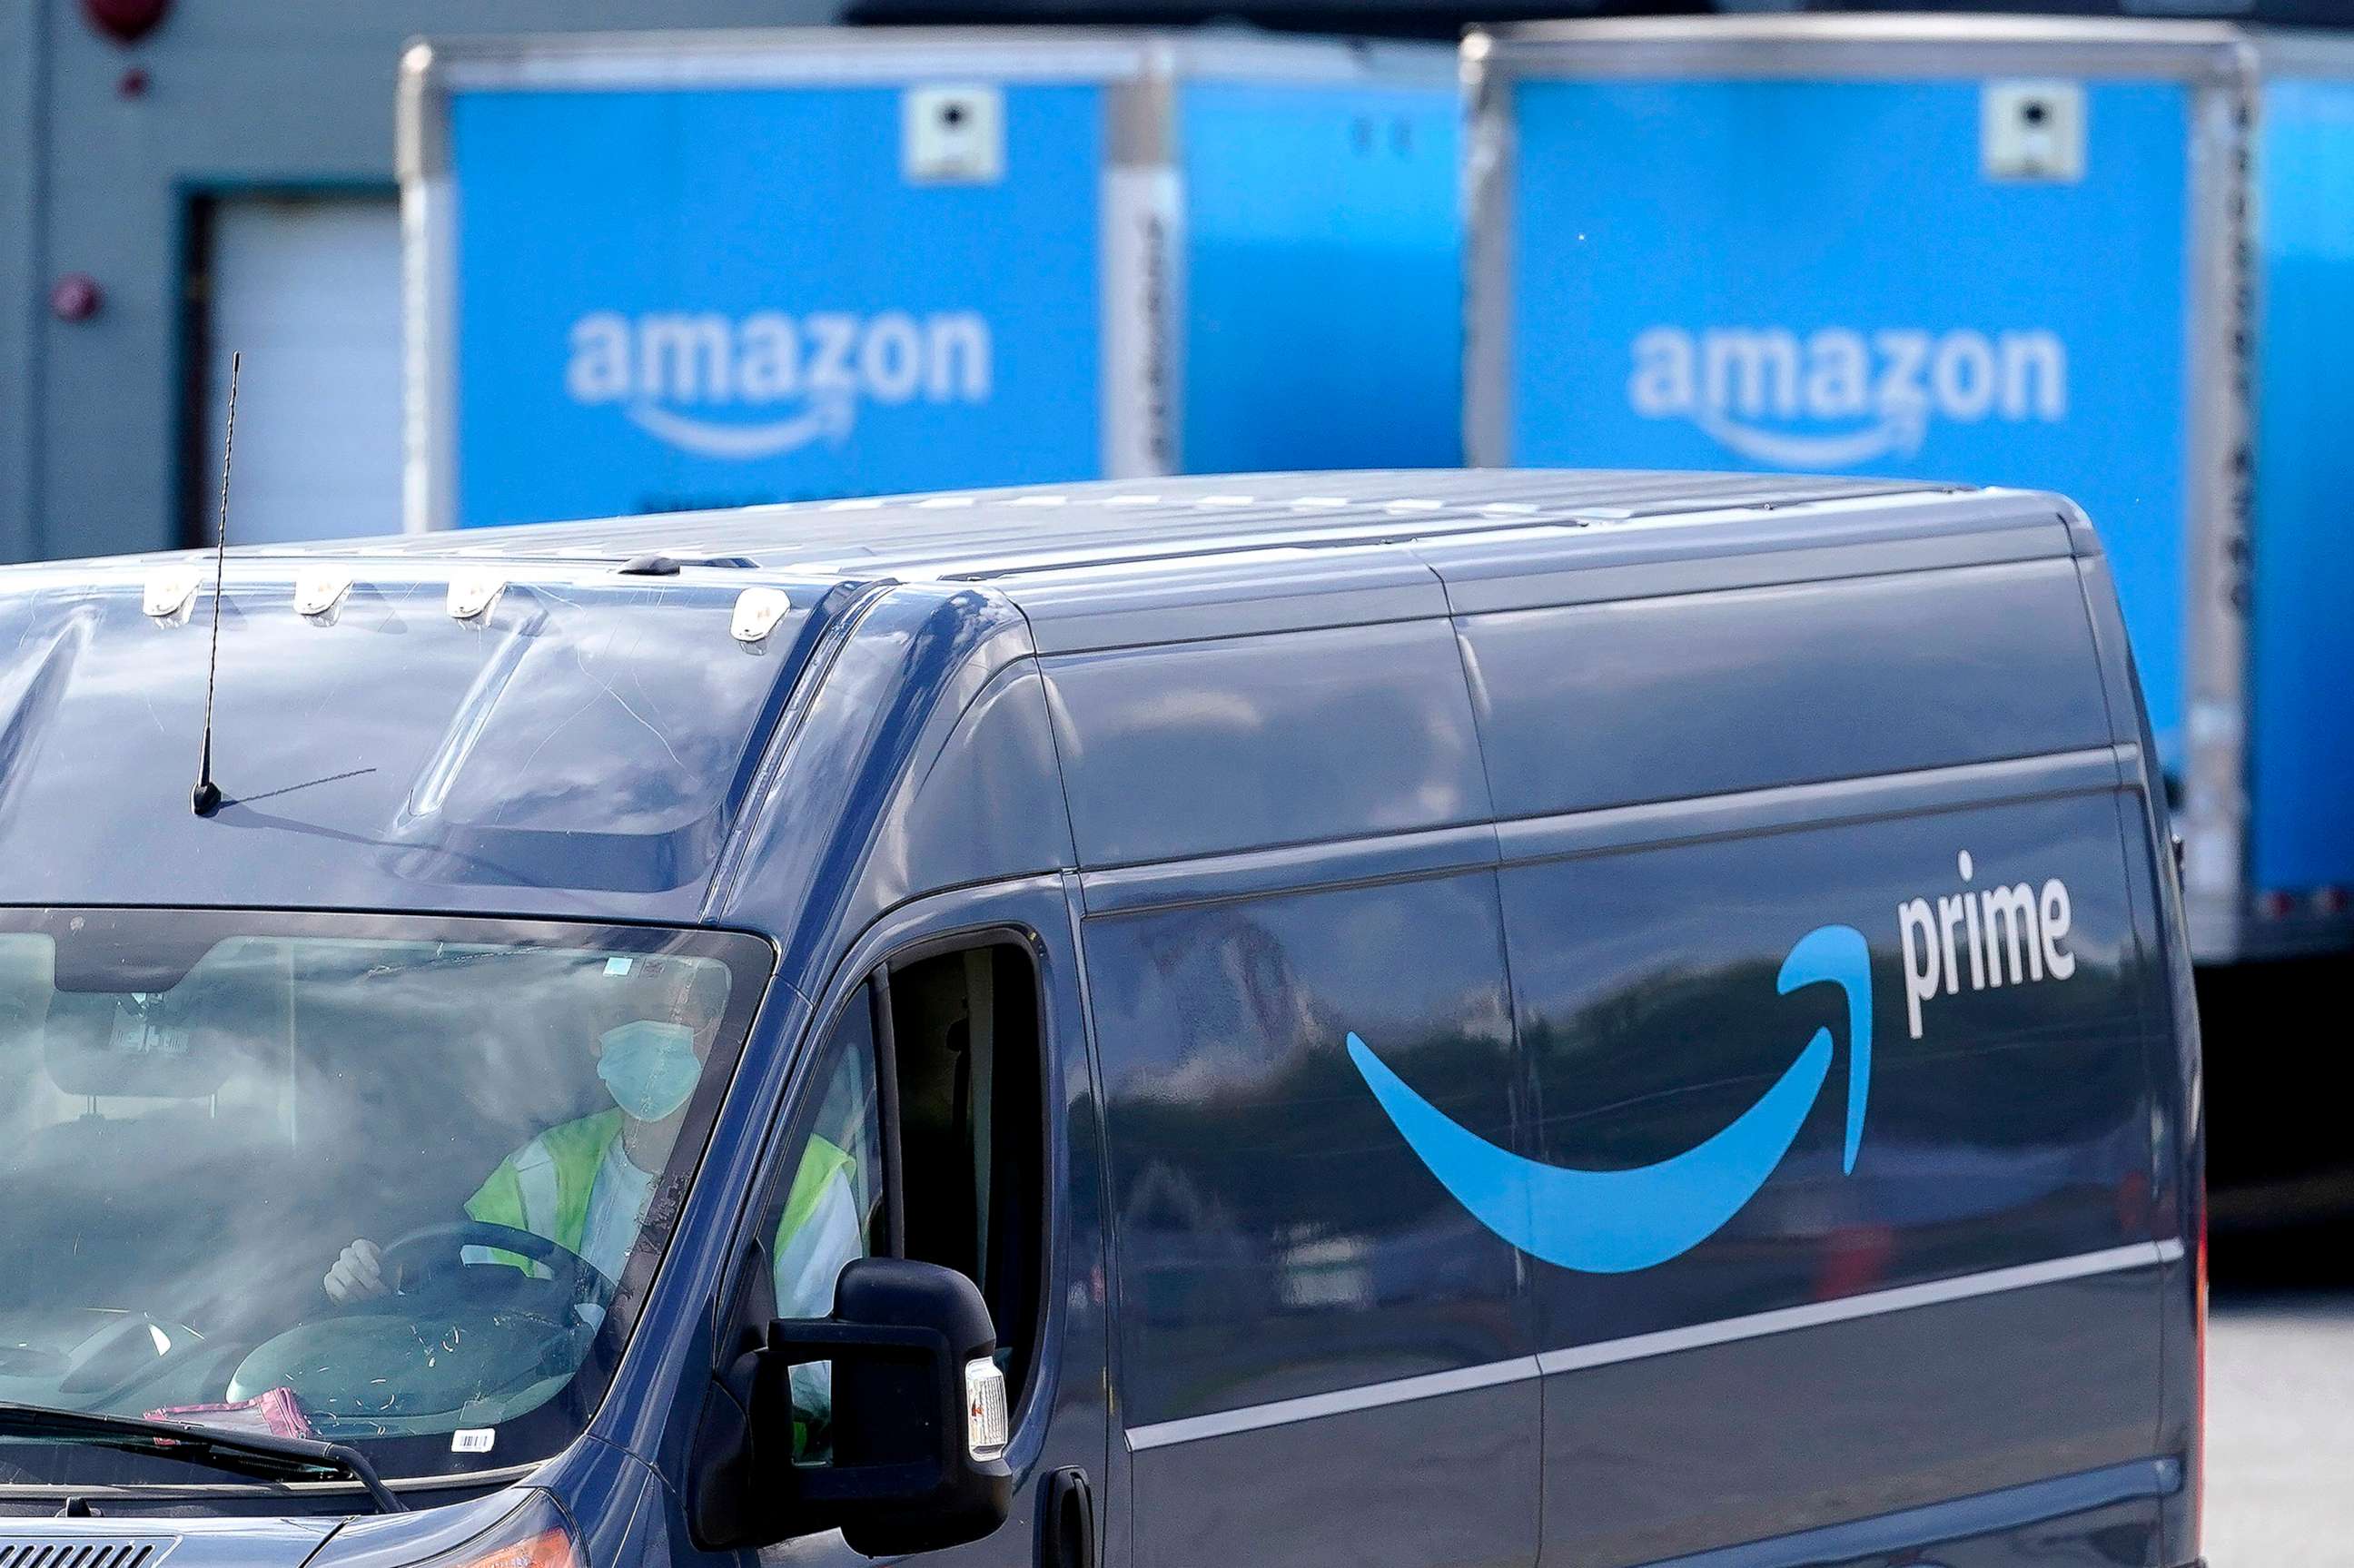 PHOTO: An Amazon Prime logo is seen on the side of a delivery van as it departs an Amazon Warehouse location on Oct. 1, 2020, in Dedham, Mass.